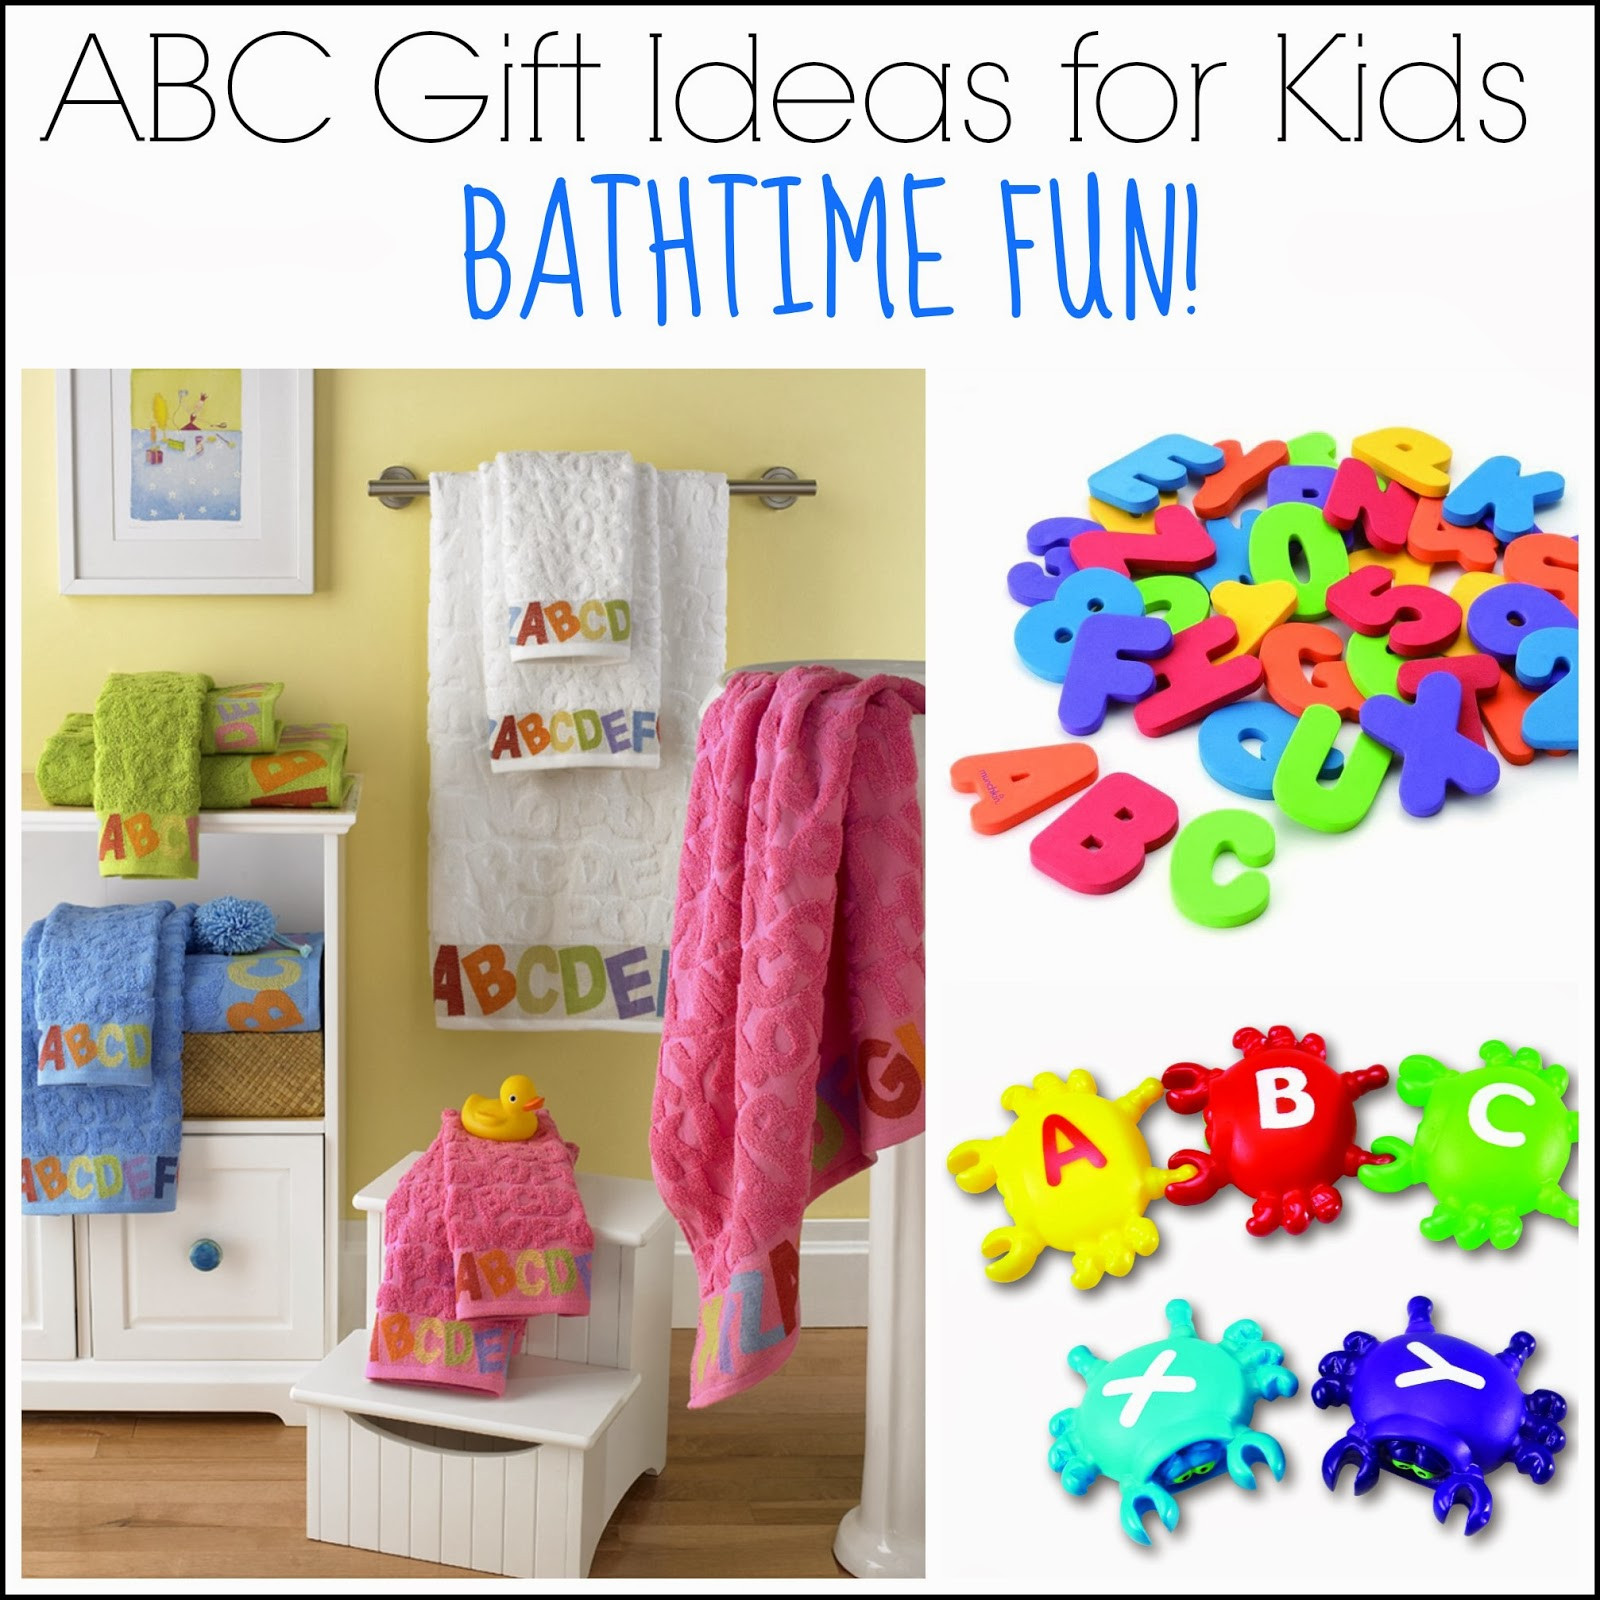 Fun Gift Ideas For Kids
 50 ABC Gift Ideas for Kids